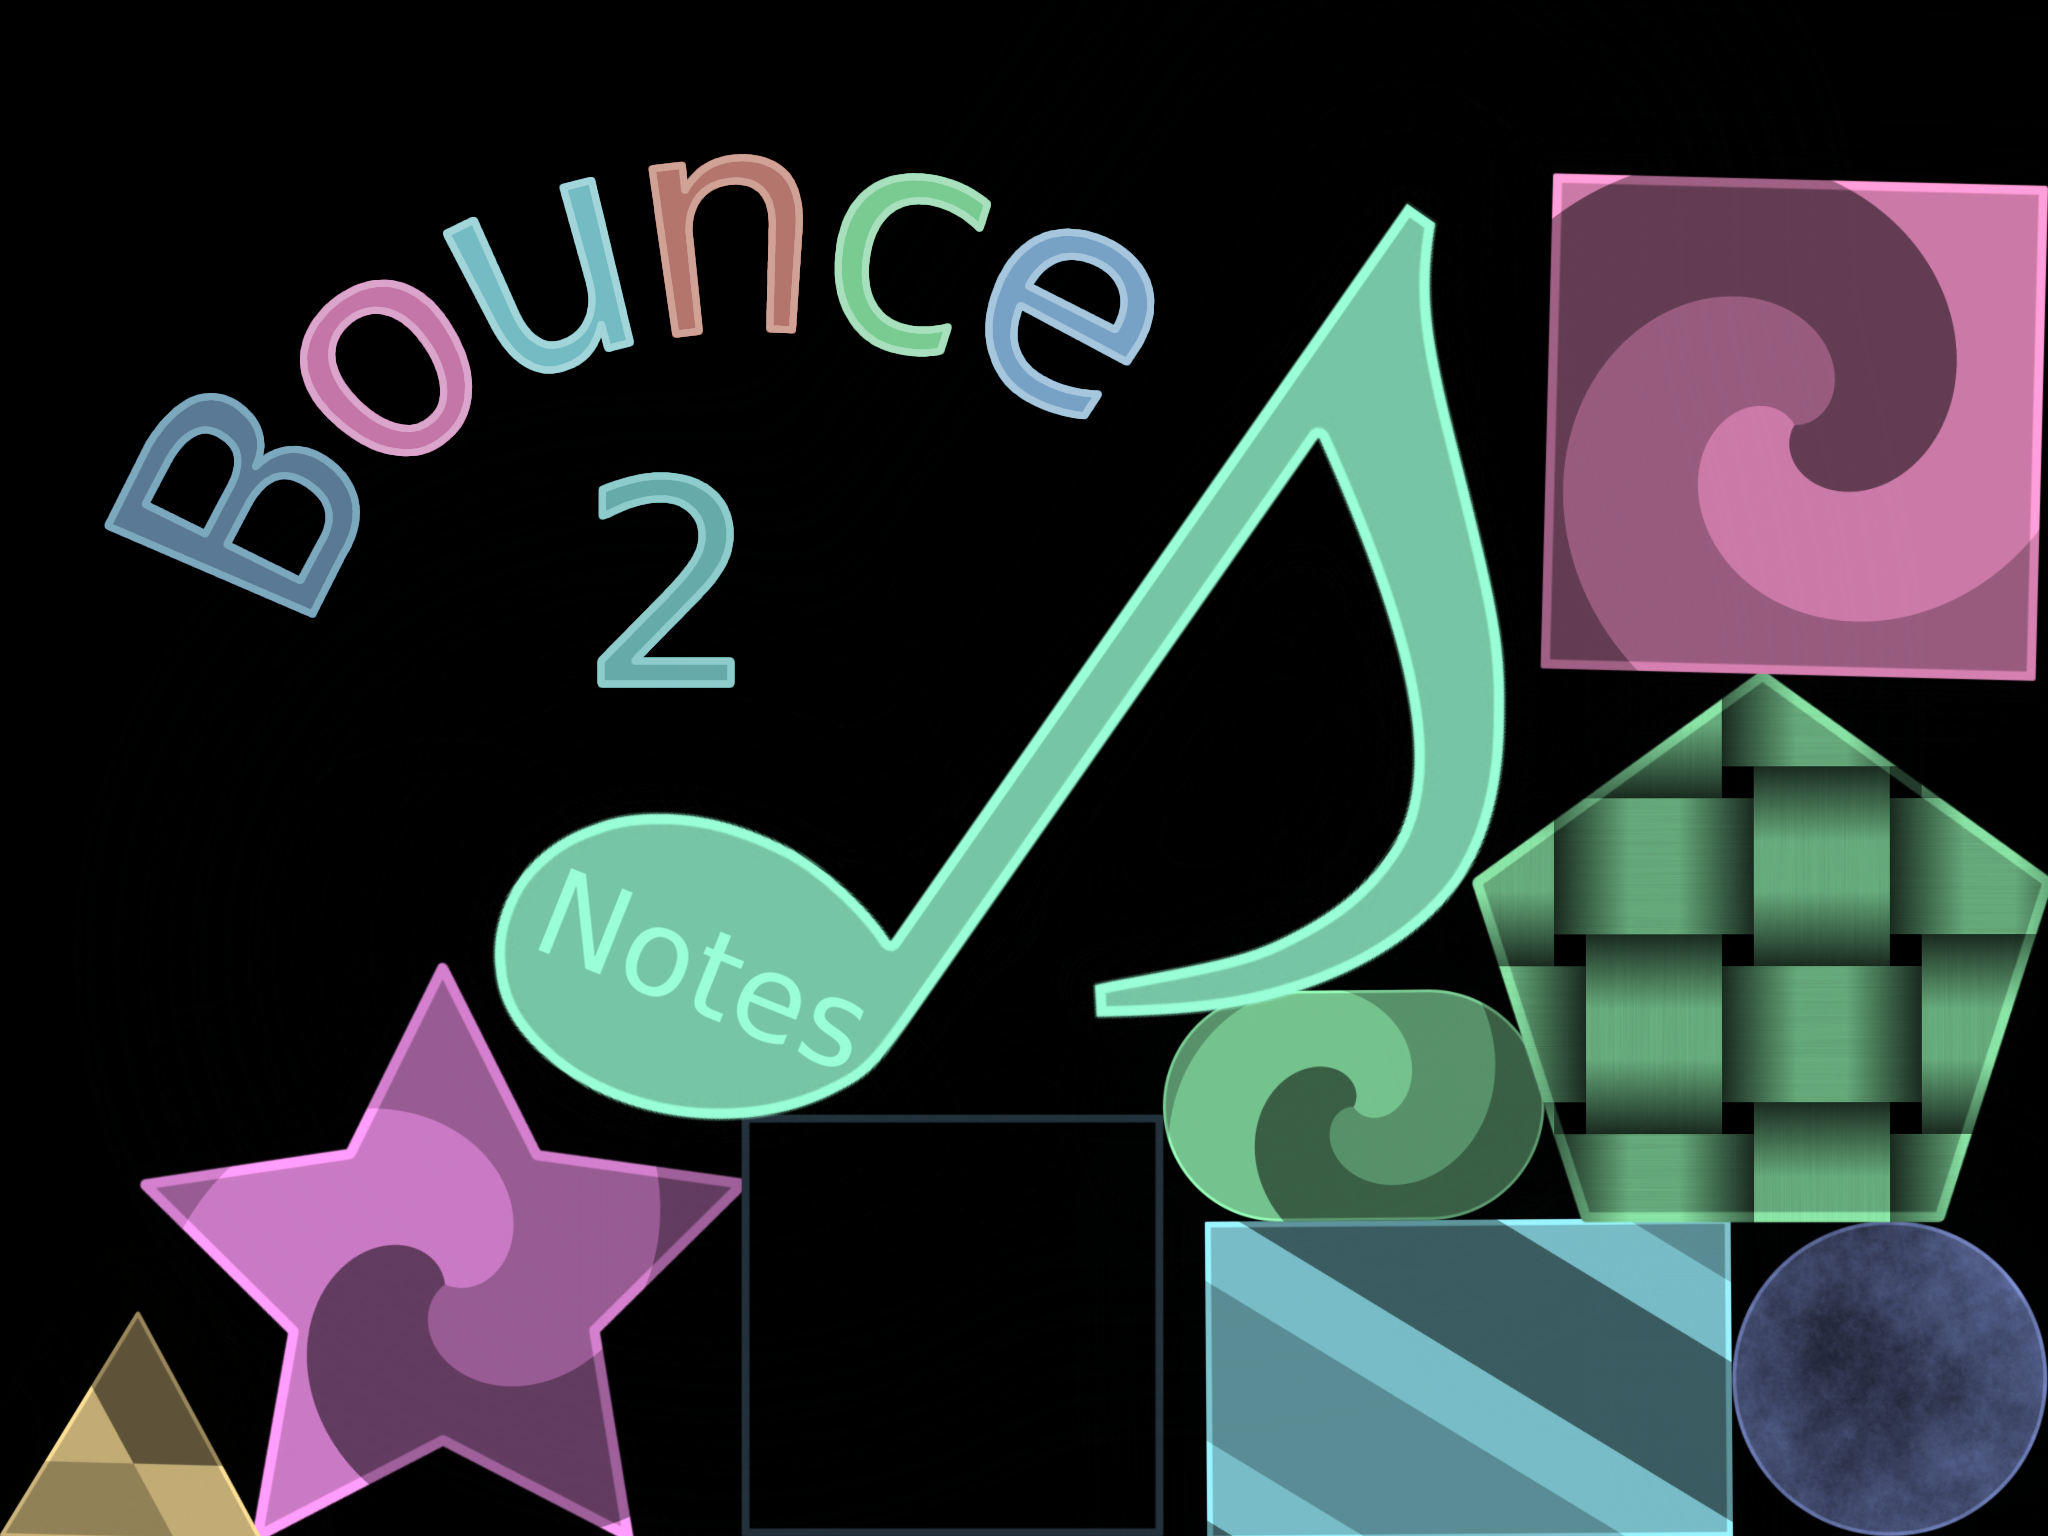 bounce2_banner2.png